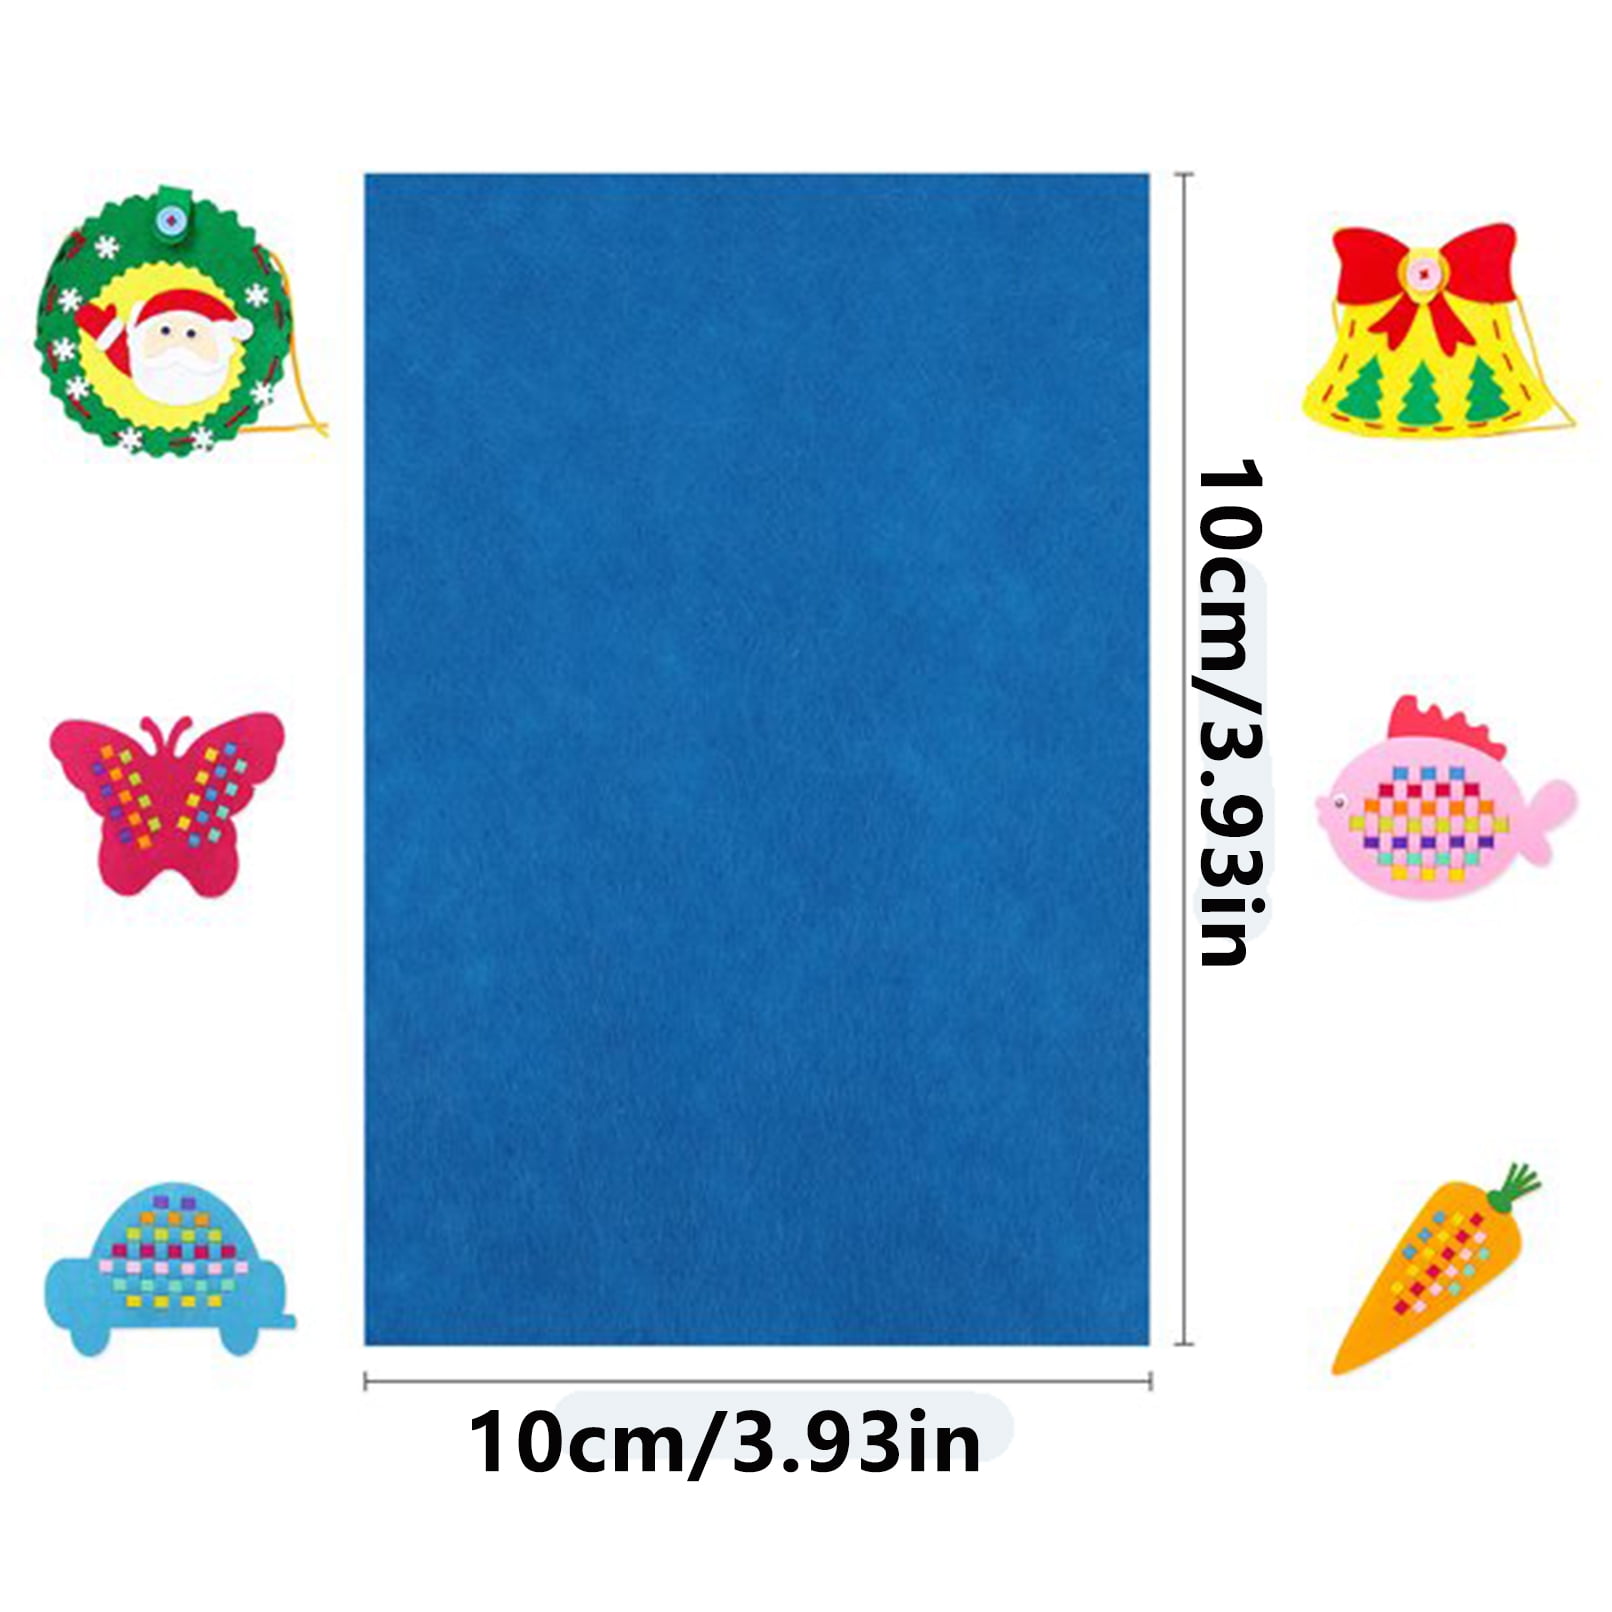 Lovegab 40 Assorted Colors 1mm Thick Small Felt Fabric Sheet Pieces Nonwoven Patchwork Sewing Felt Squares Pack for Kids Adult DIY Art Craft Project, 40pcs